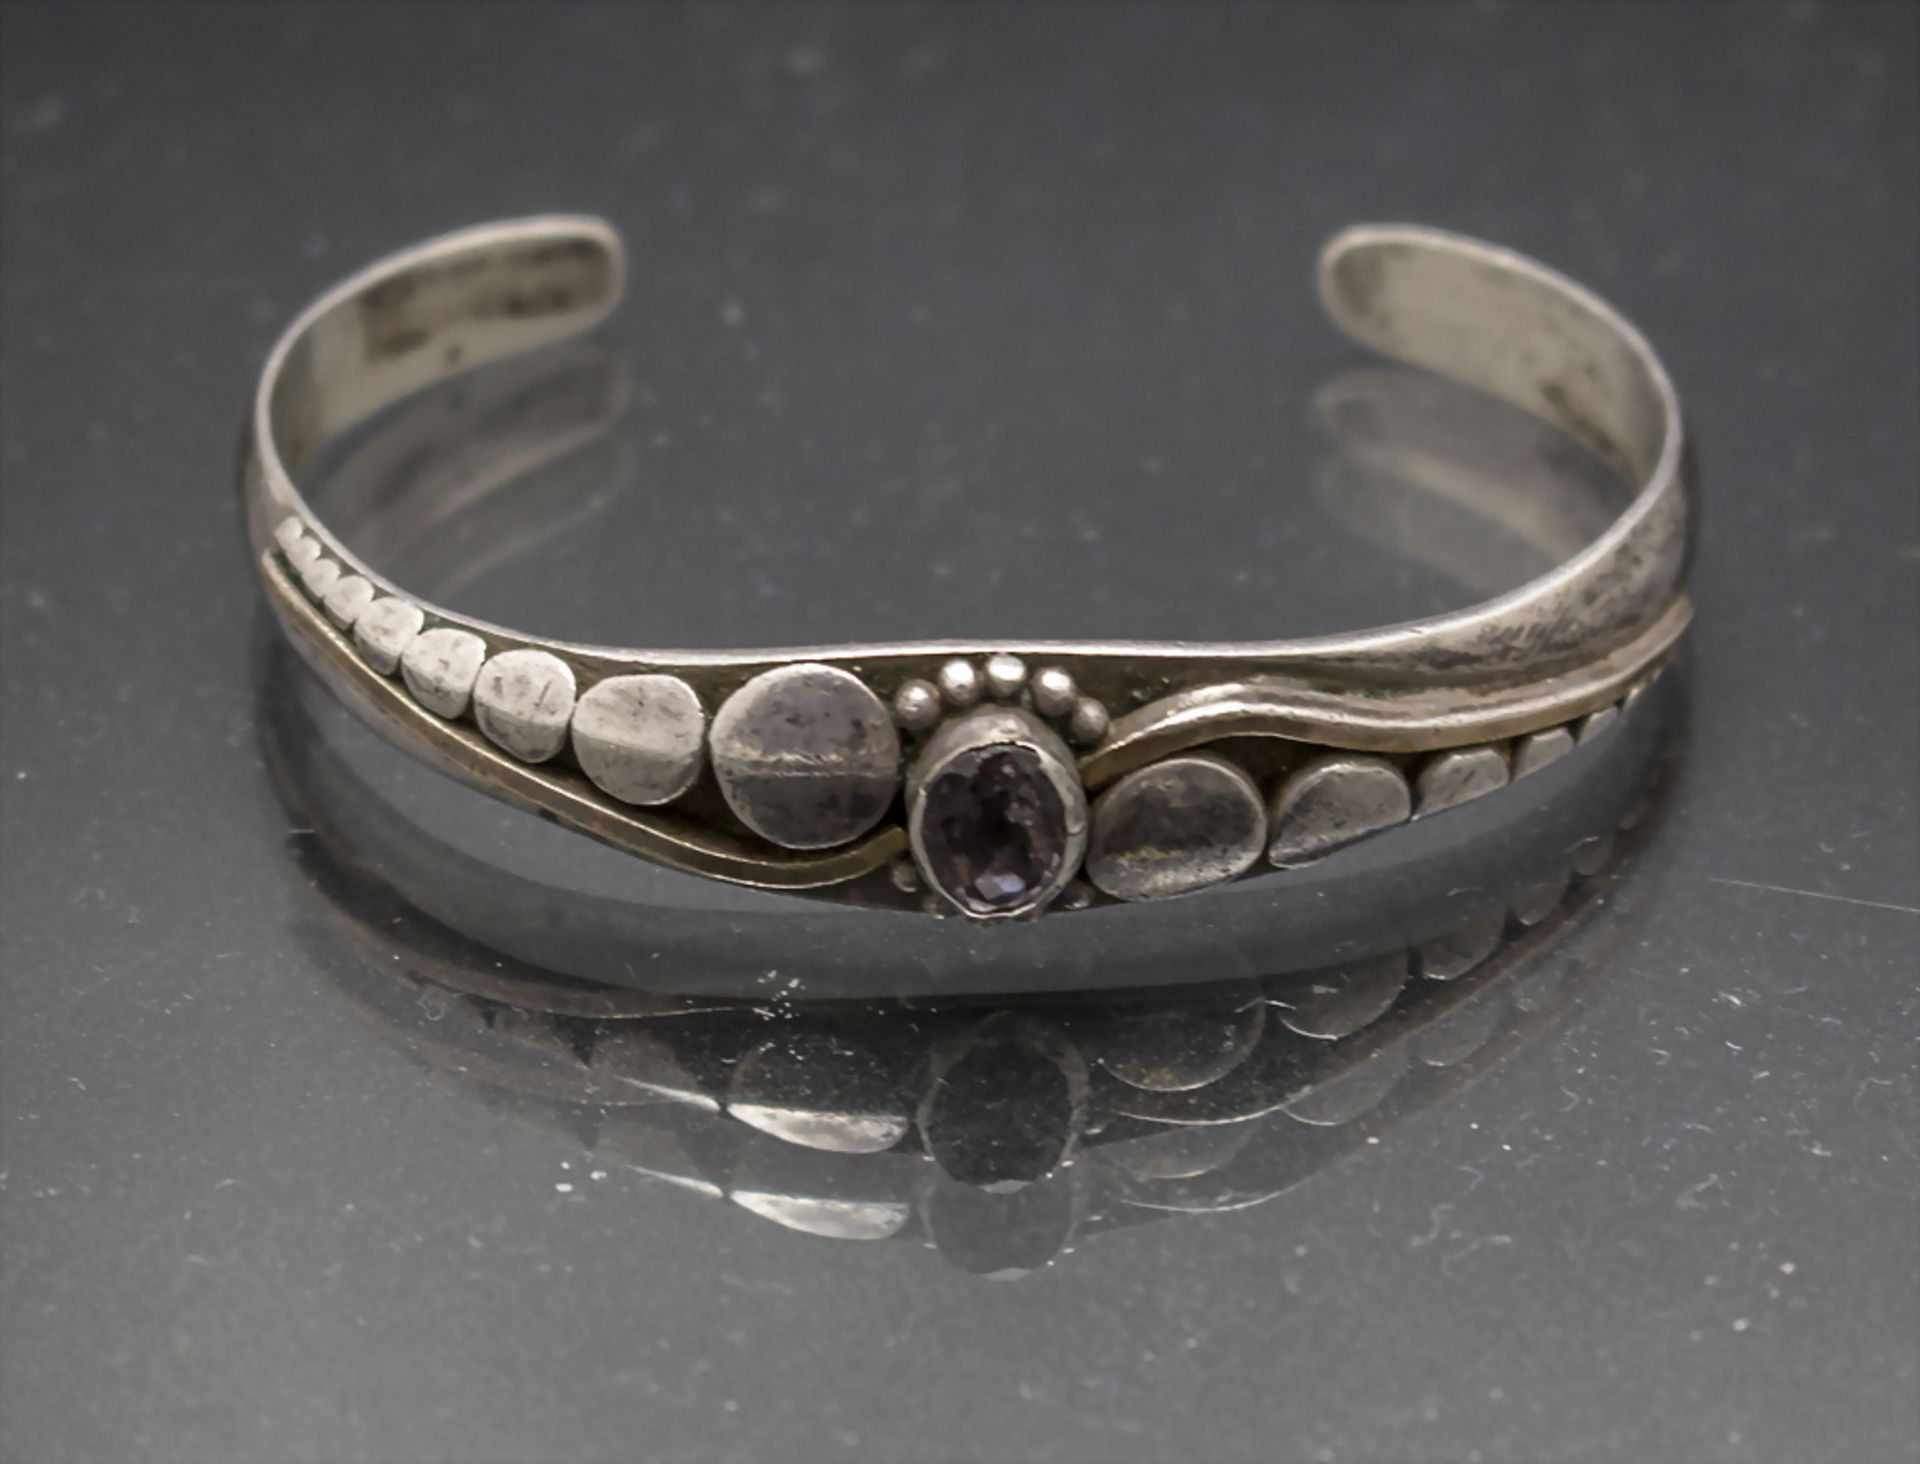 Armreif aus Sterling Silber mit Amethyst / A Sterling silver bangle with an amethyst